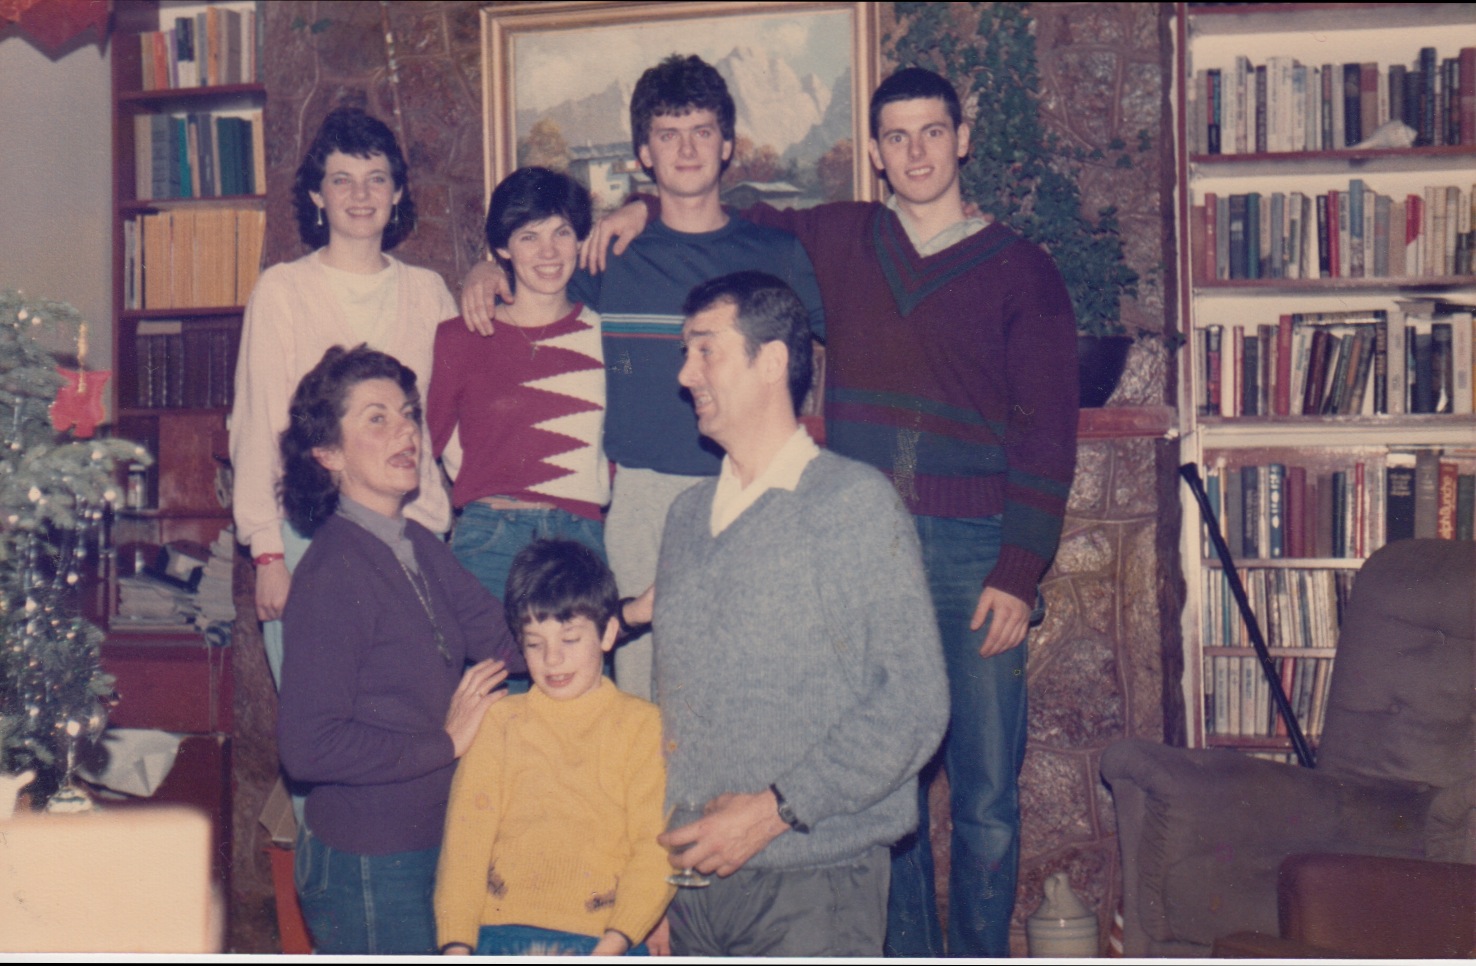 Back row: Shannon, me, Stephen, ShenleyFront row: Mom, Spencer, Dad